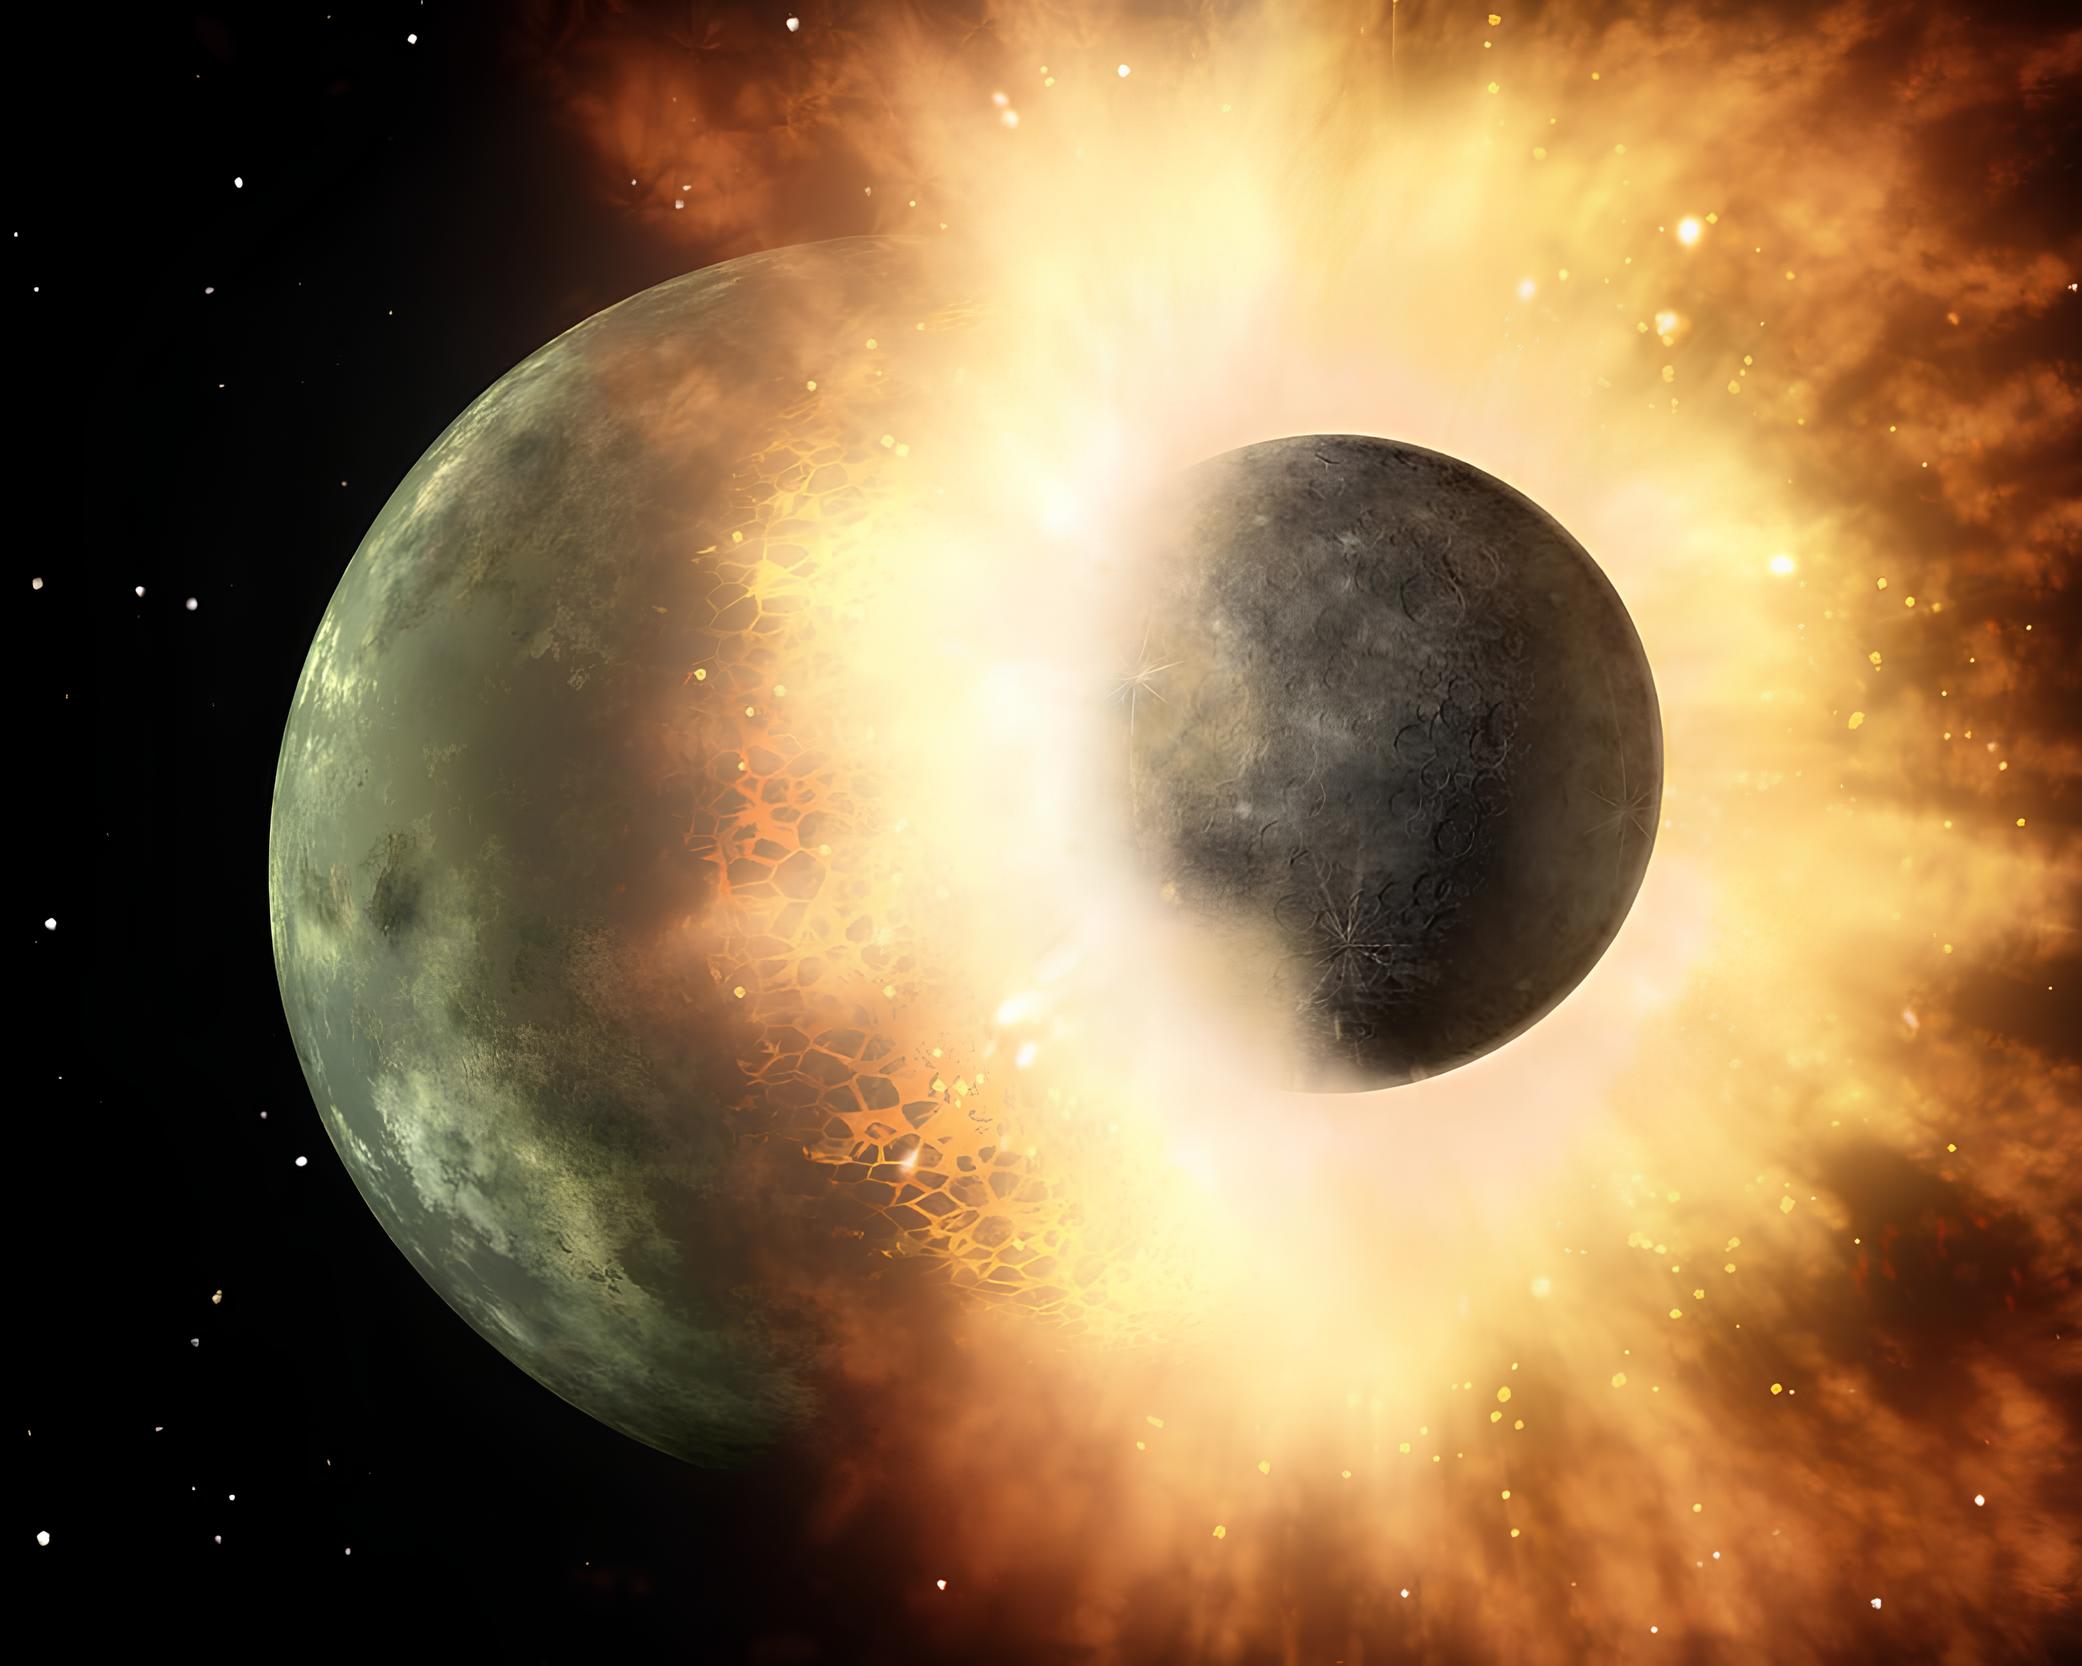 Giant Impact Hypothesis moon formed